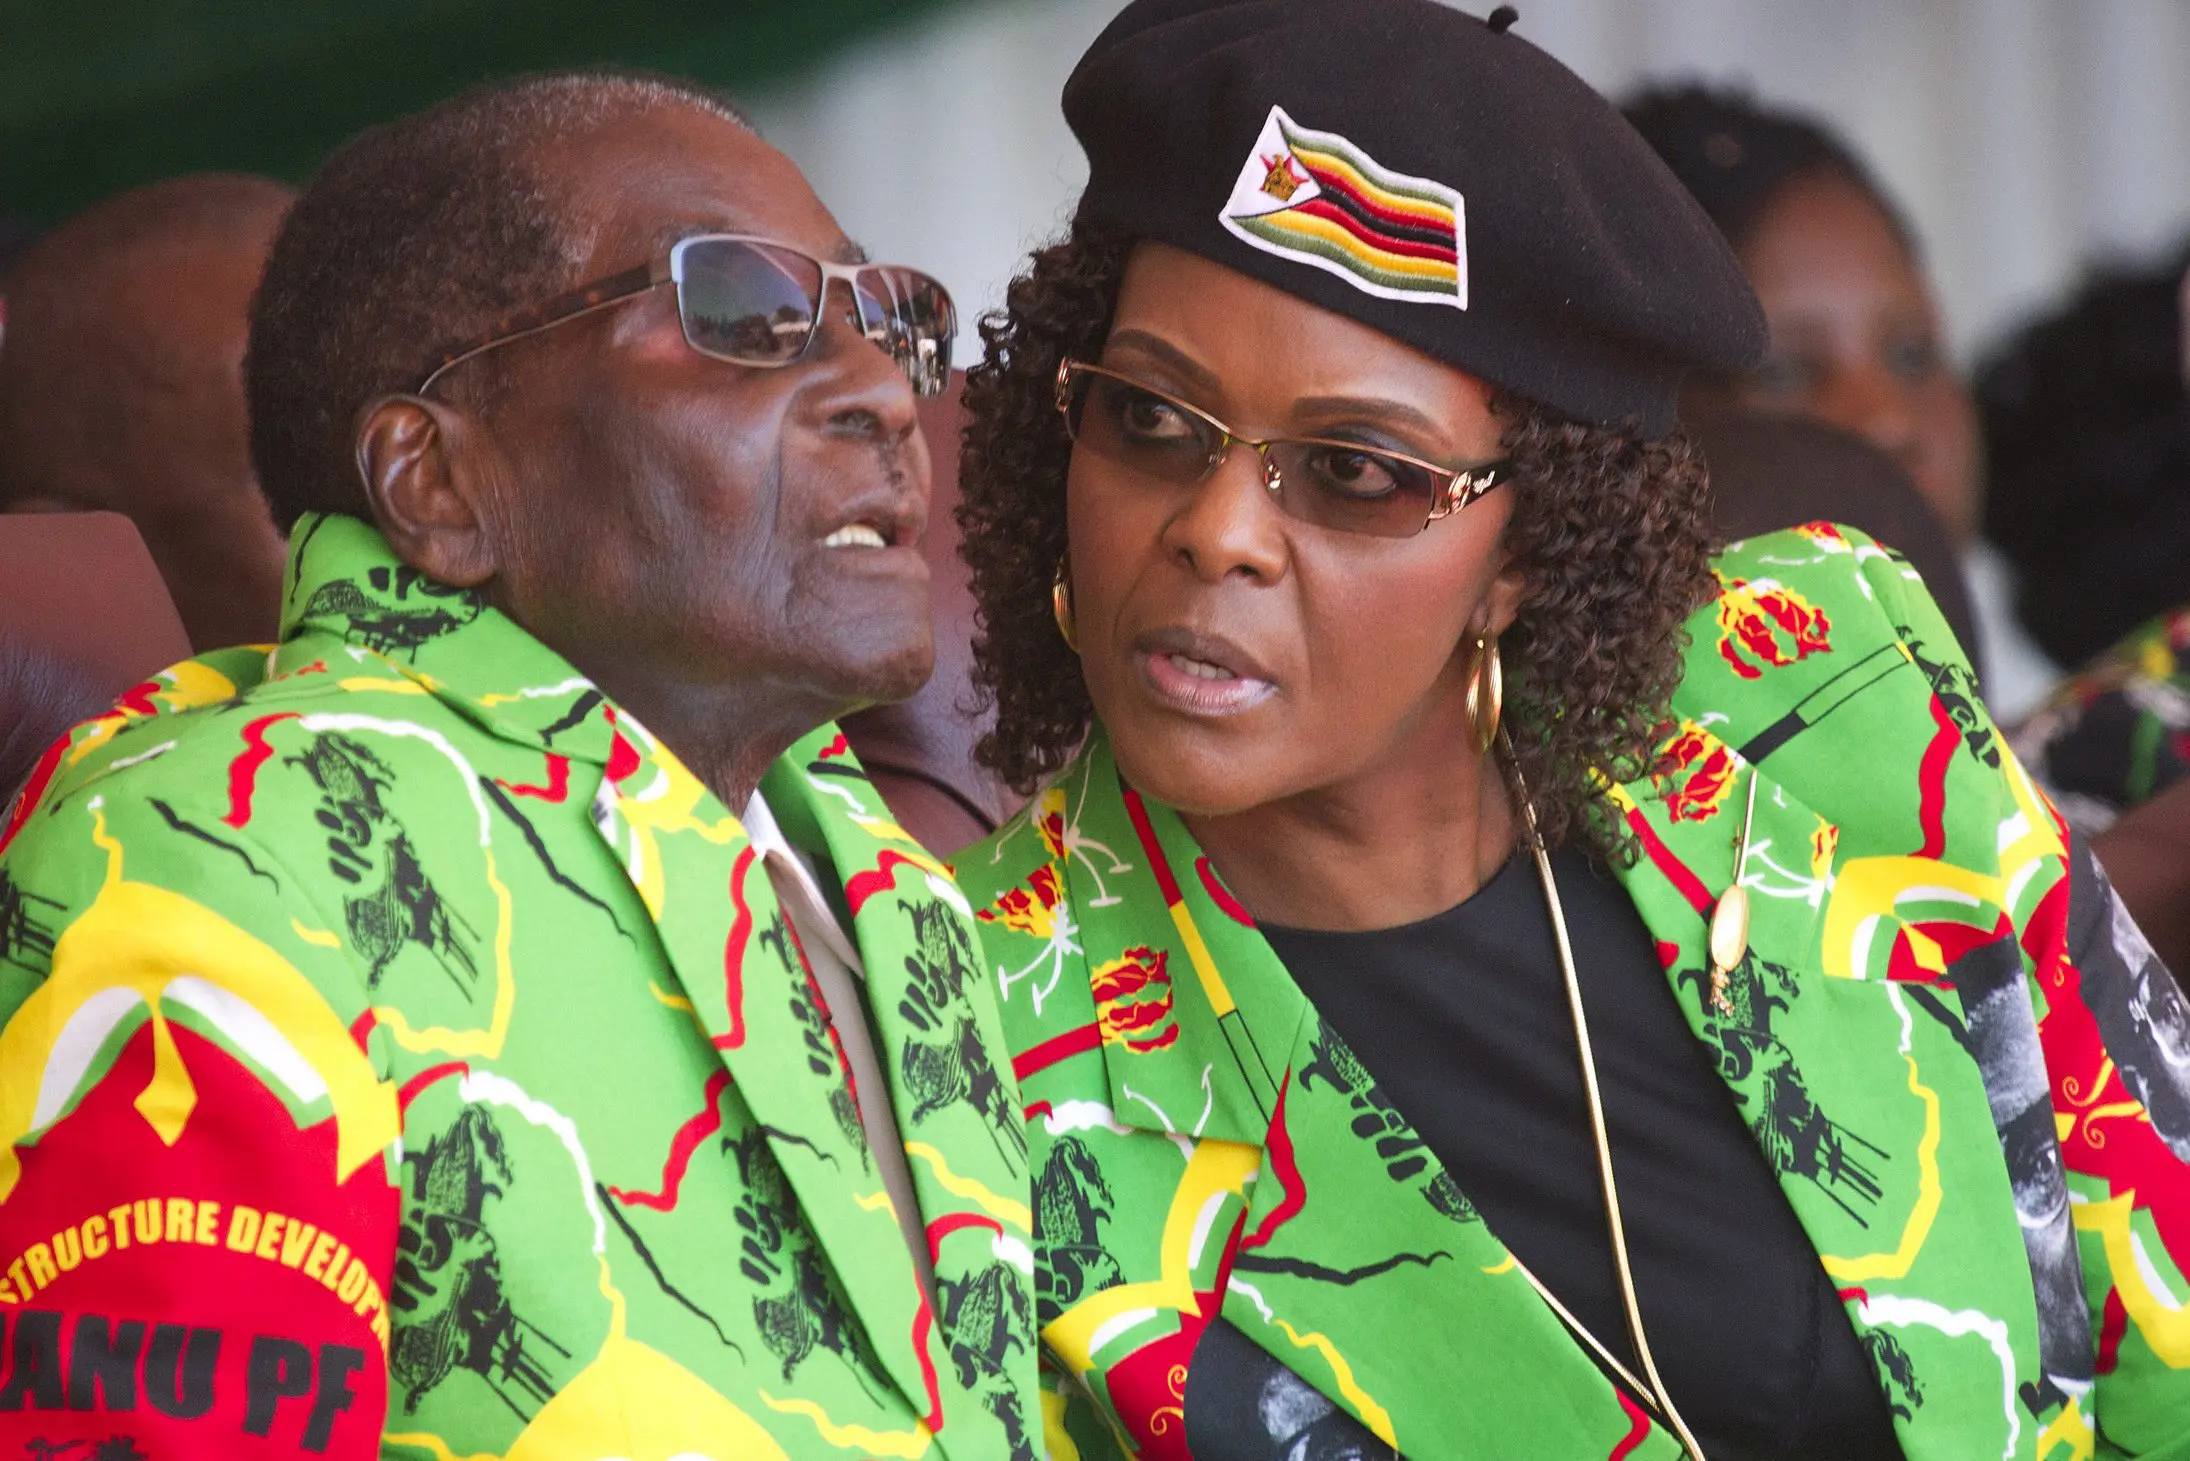 Robert Mugabe and his 21 years younger wife Grace, who was to take over power in Zimbabwe.